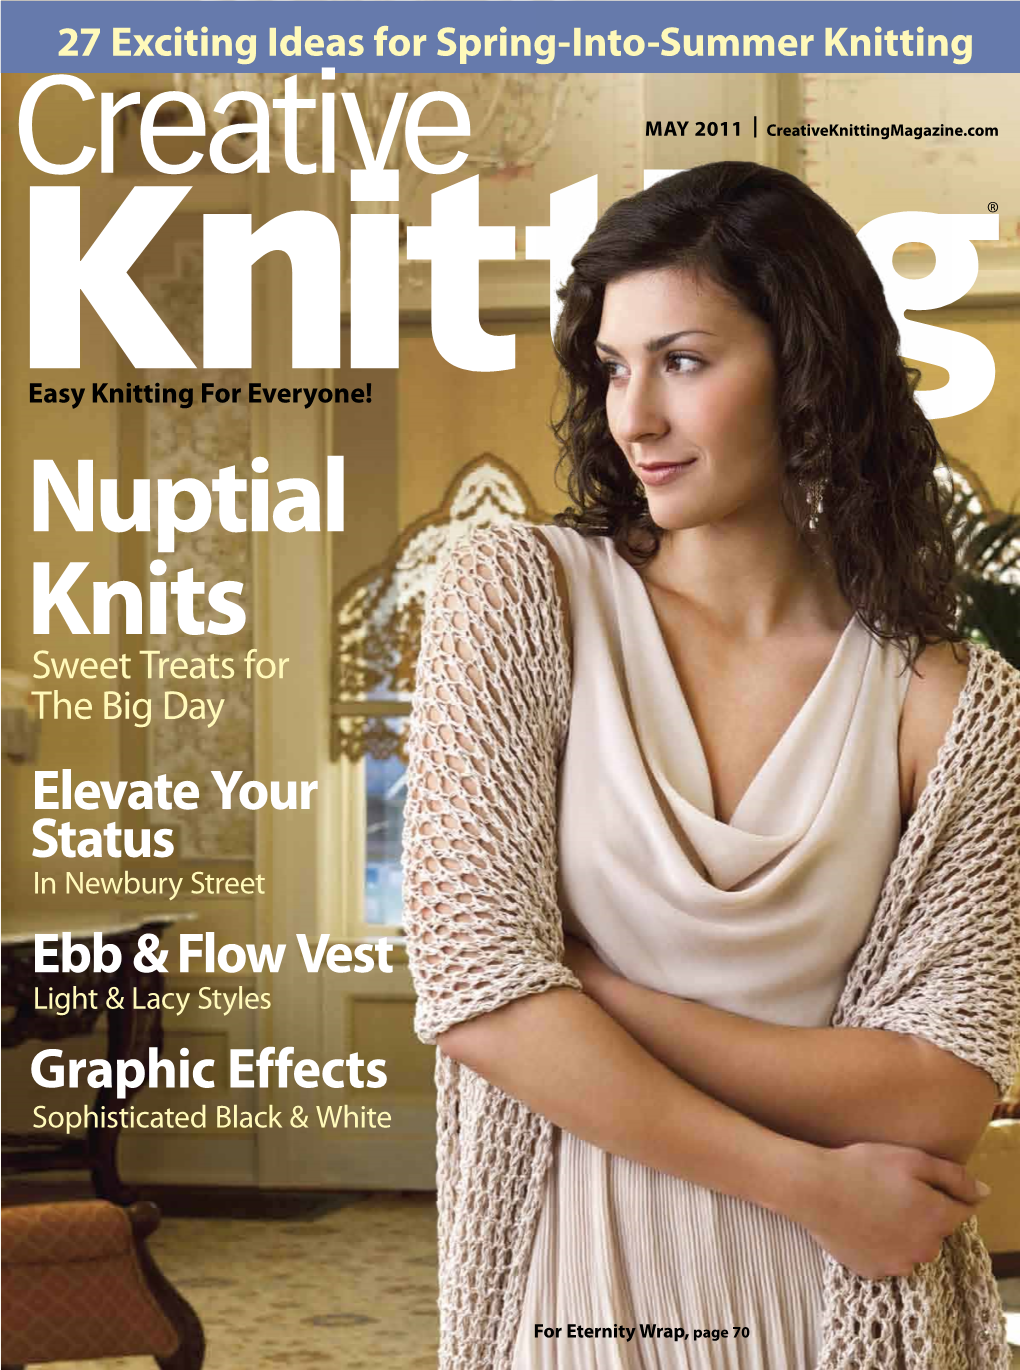 Nuptial Knits Sweet Treats for the Big Day Elevate Your Status in Newbury Street Ebb & Flow Vest Light & Lacy Styles Graphic Effects Sophisticated Black & White